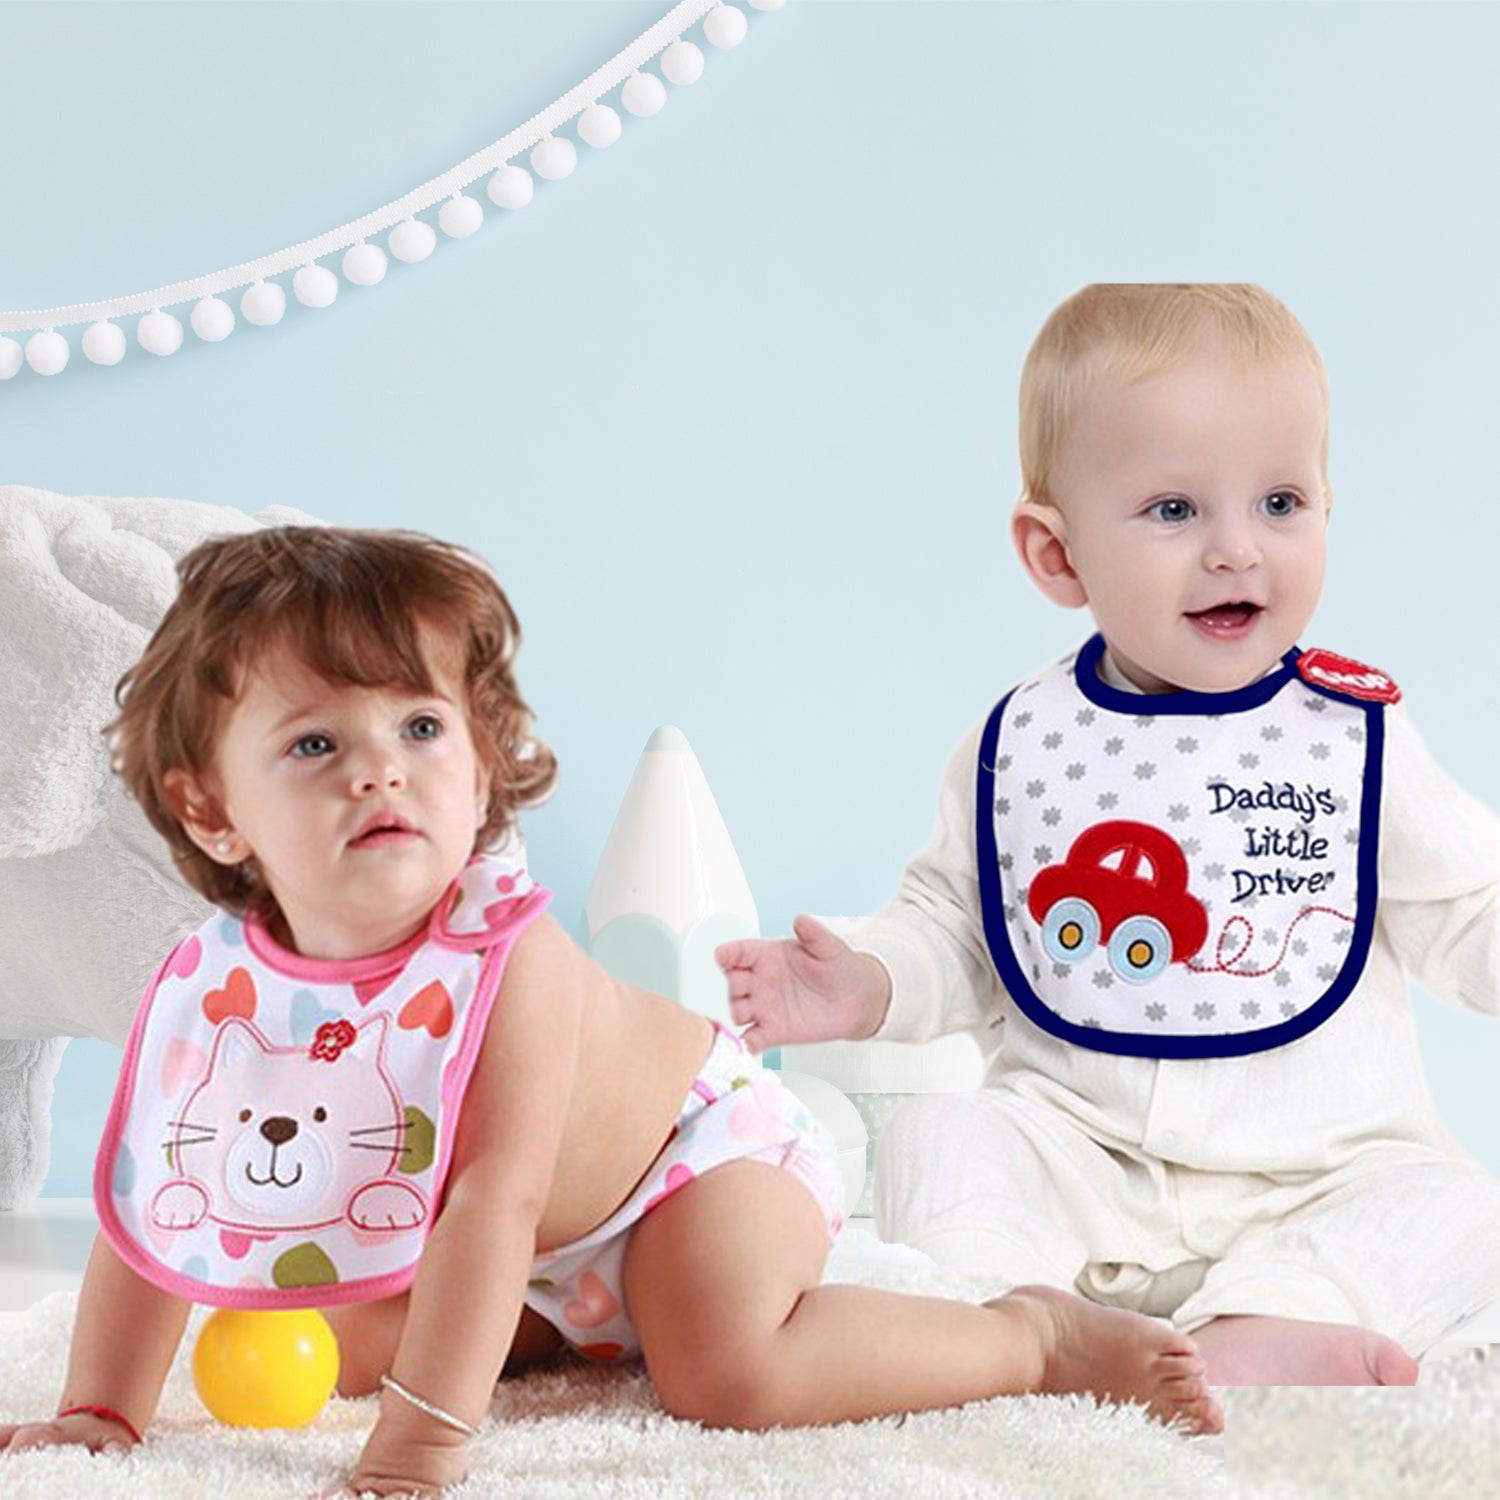 2 Pack of Baby Waterproof Cotton Bibs with Embroidered Designs - Gifts Are Blue - Babies Wearing Waterproof Bibs